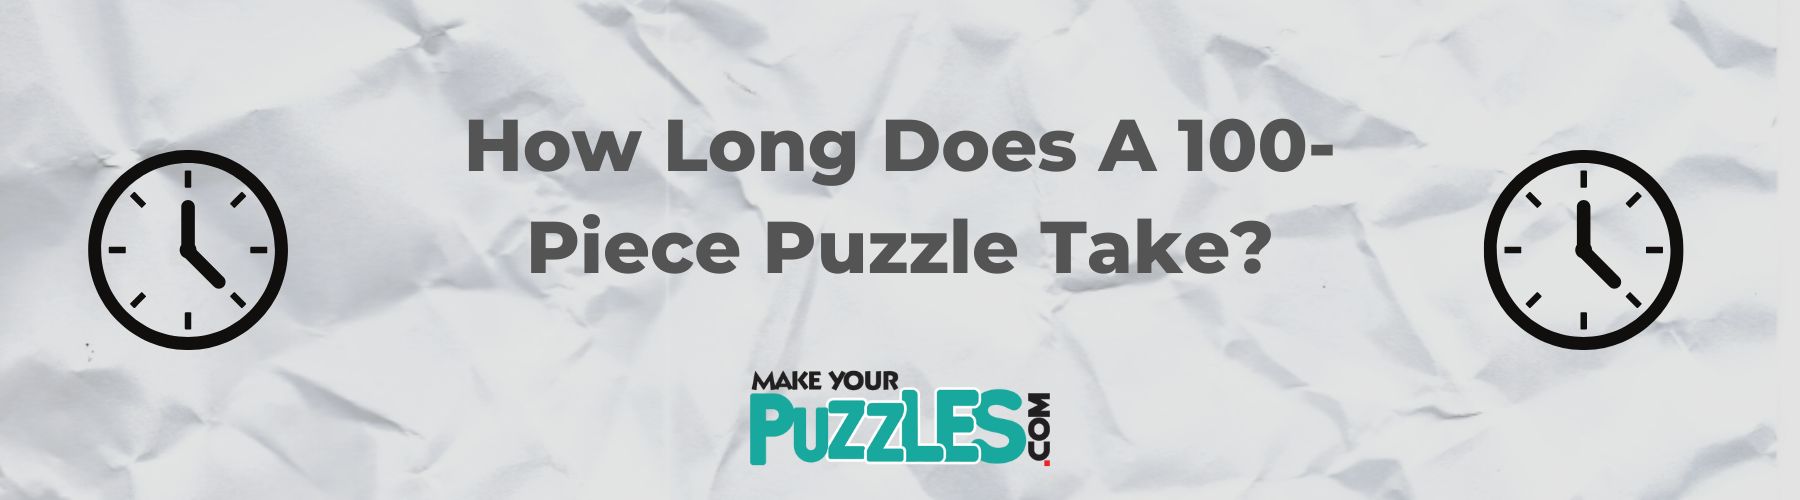 How long does a 100-piece puzzle take? 